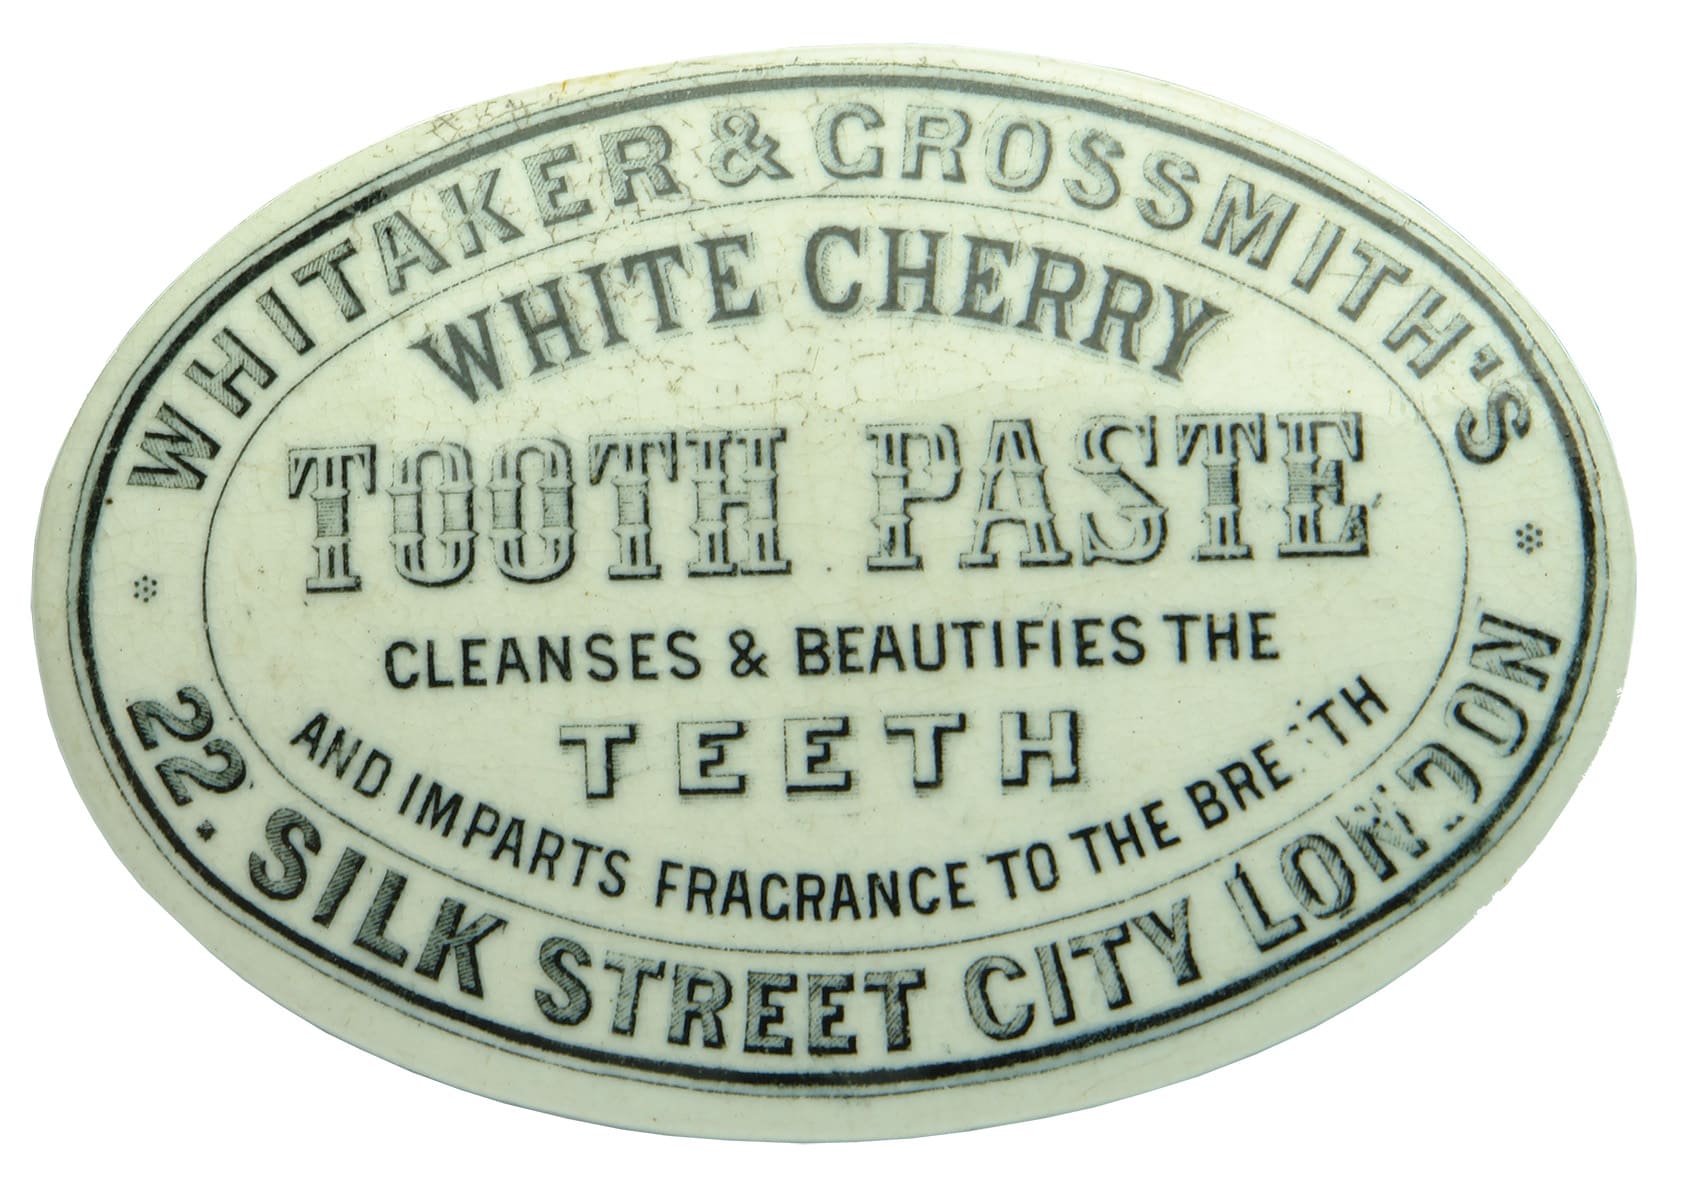 Whittaker Grossmith White Cherry Tooth Paste Antique Pot Lid